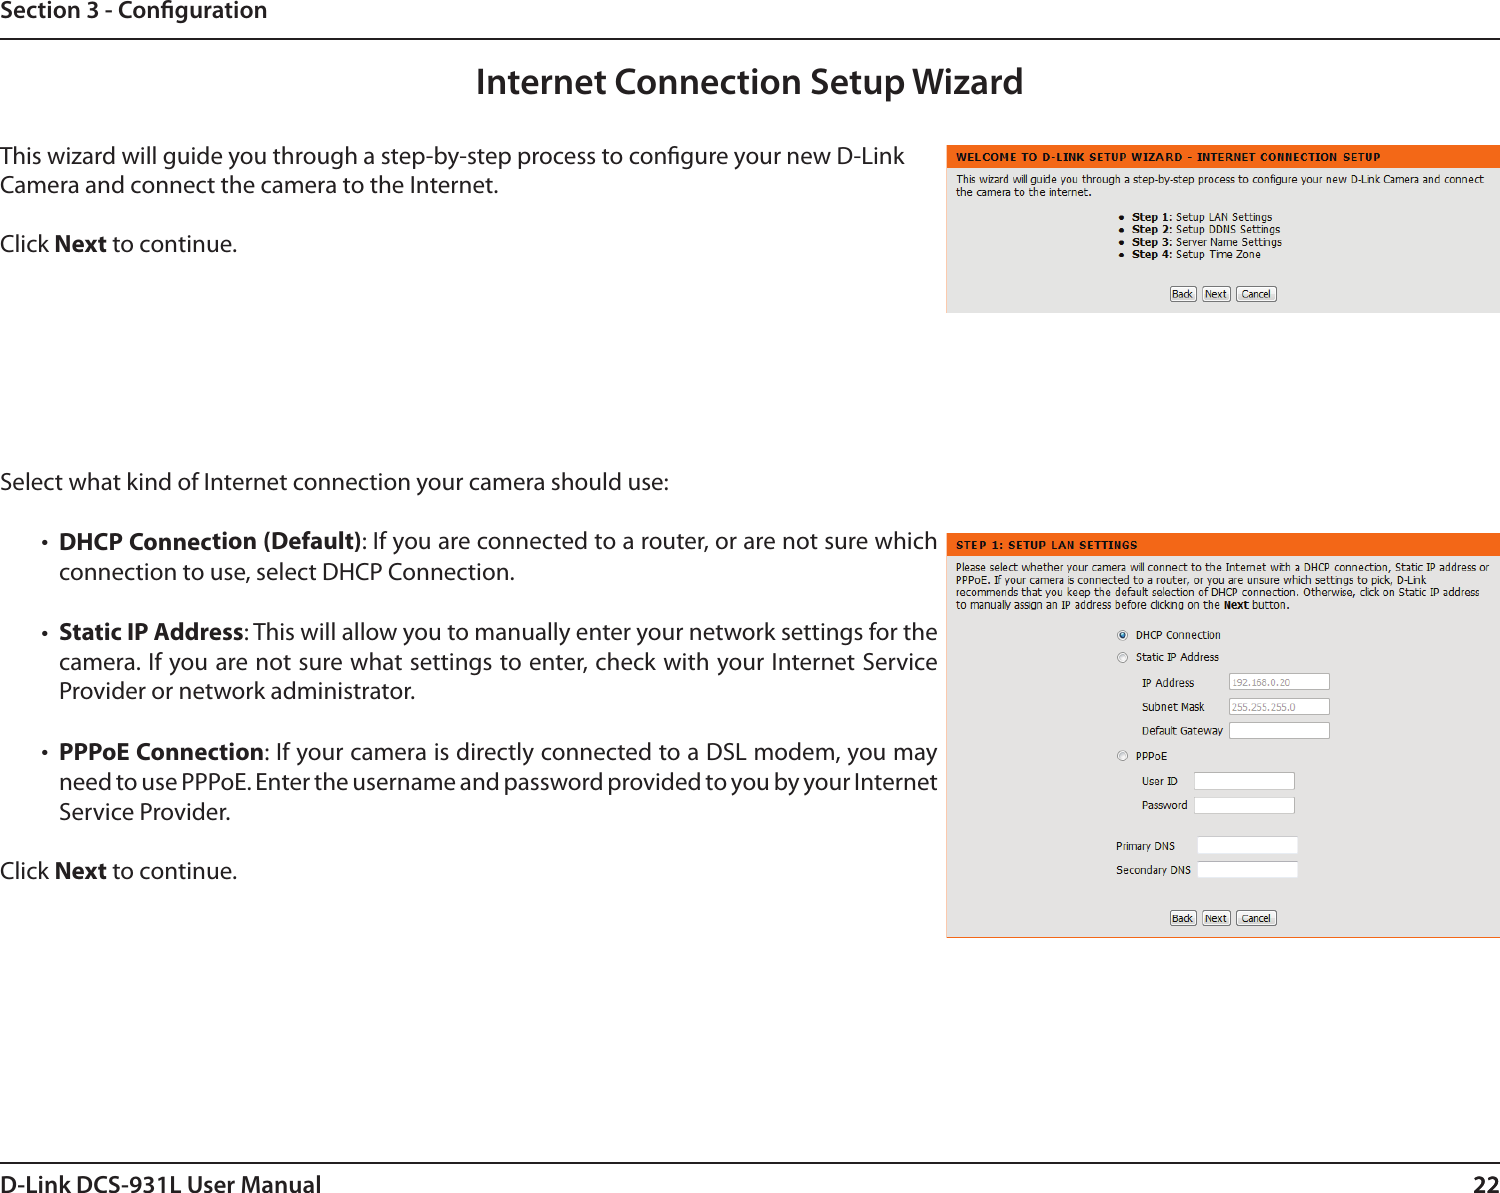 22D-Link DCS-931L User Manual 22Section 3 - CongurationInternet Connection Setup WizardThis wizard will guide you through a step-by-step process to congure your new D-Link Camera and connect the camera to the Internet. Click Next to continue.Select what kind of Internet connection your camera should use:•  DHCP Connection (Default): If you are connected to a router, or are not sure which connection to use, select DHCP Connection.•  Static IP Address: This will allow you to manually enter your network settings for the camera. If you are not sure what settings to enter, check with your Internet Service Provider or network administrator.•  PPPoE Connection: If your camera is directly connected to a DSL modem, you may need to use PPPoE. Enter the username and password provided to you by your Internet  Service Provider.Click Next to continue.